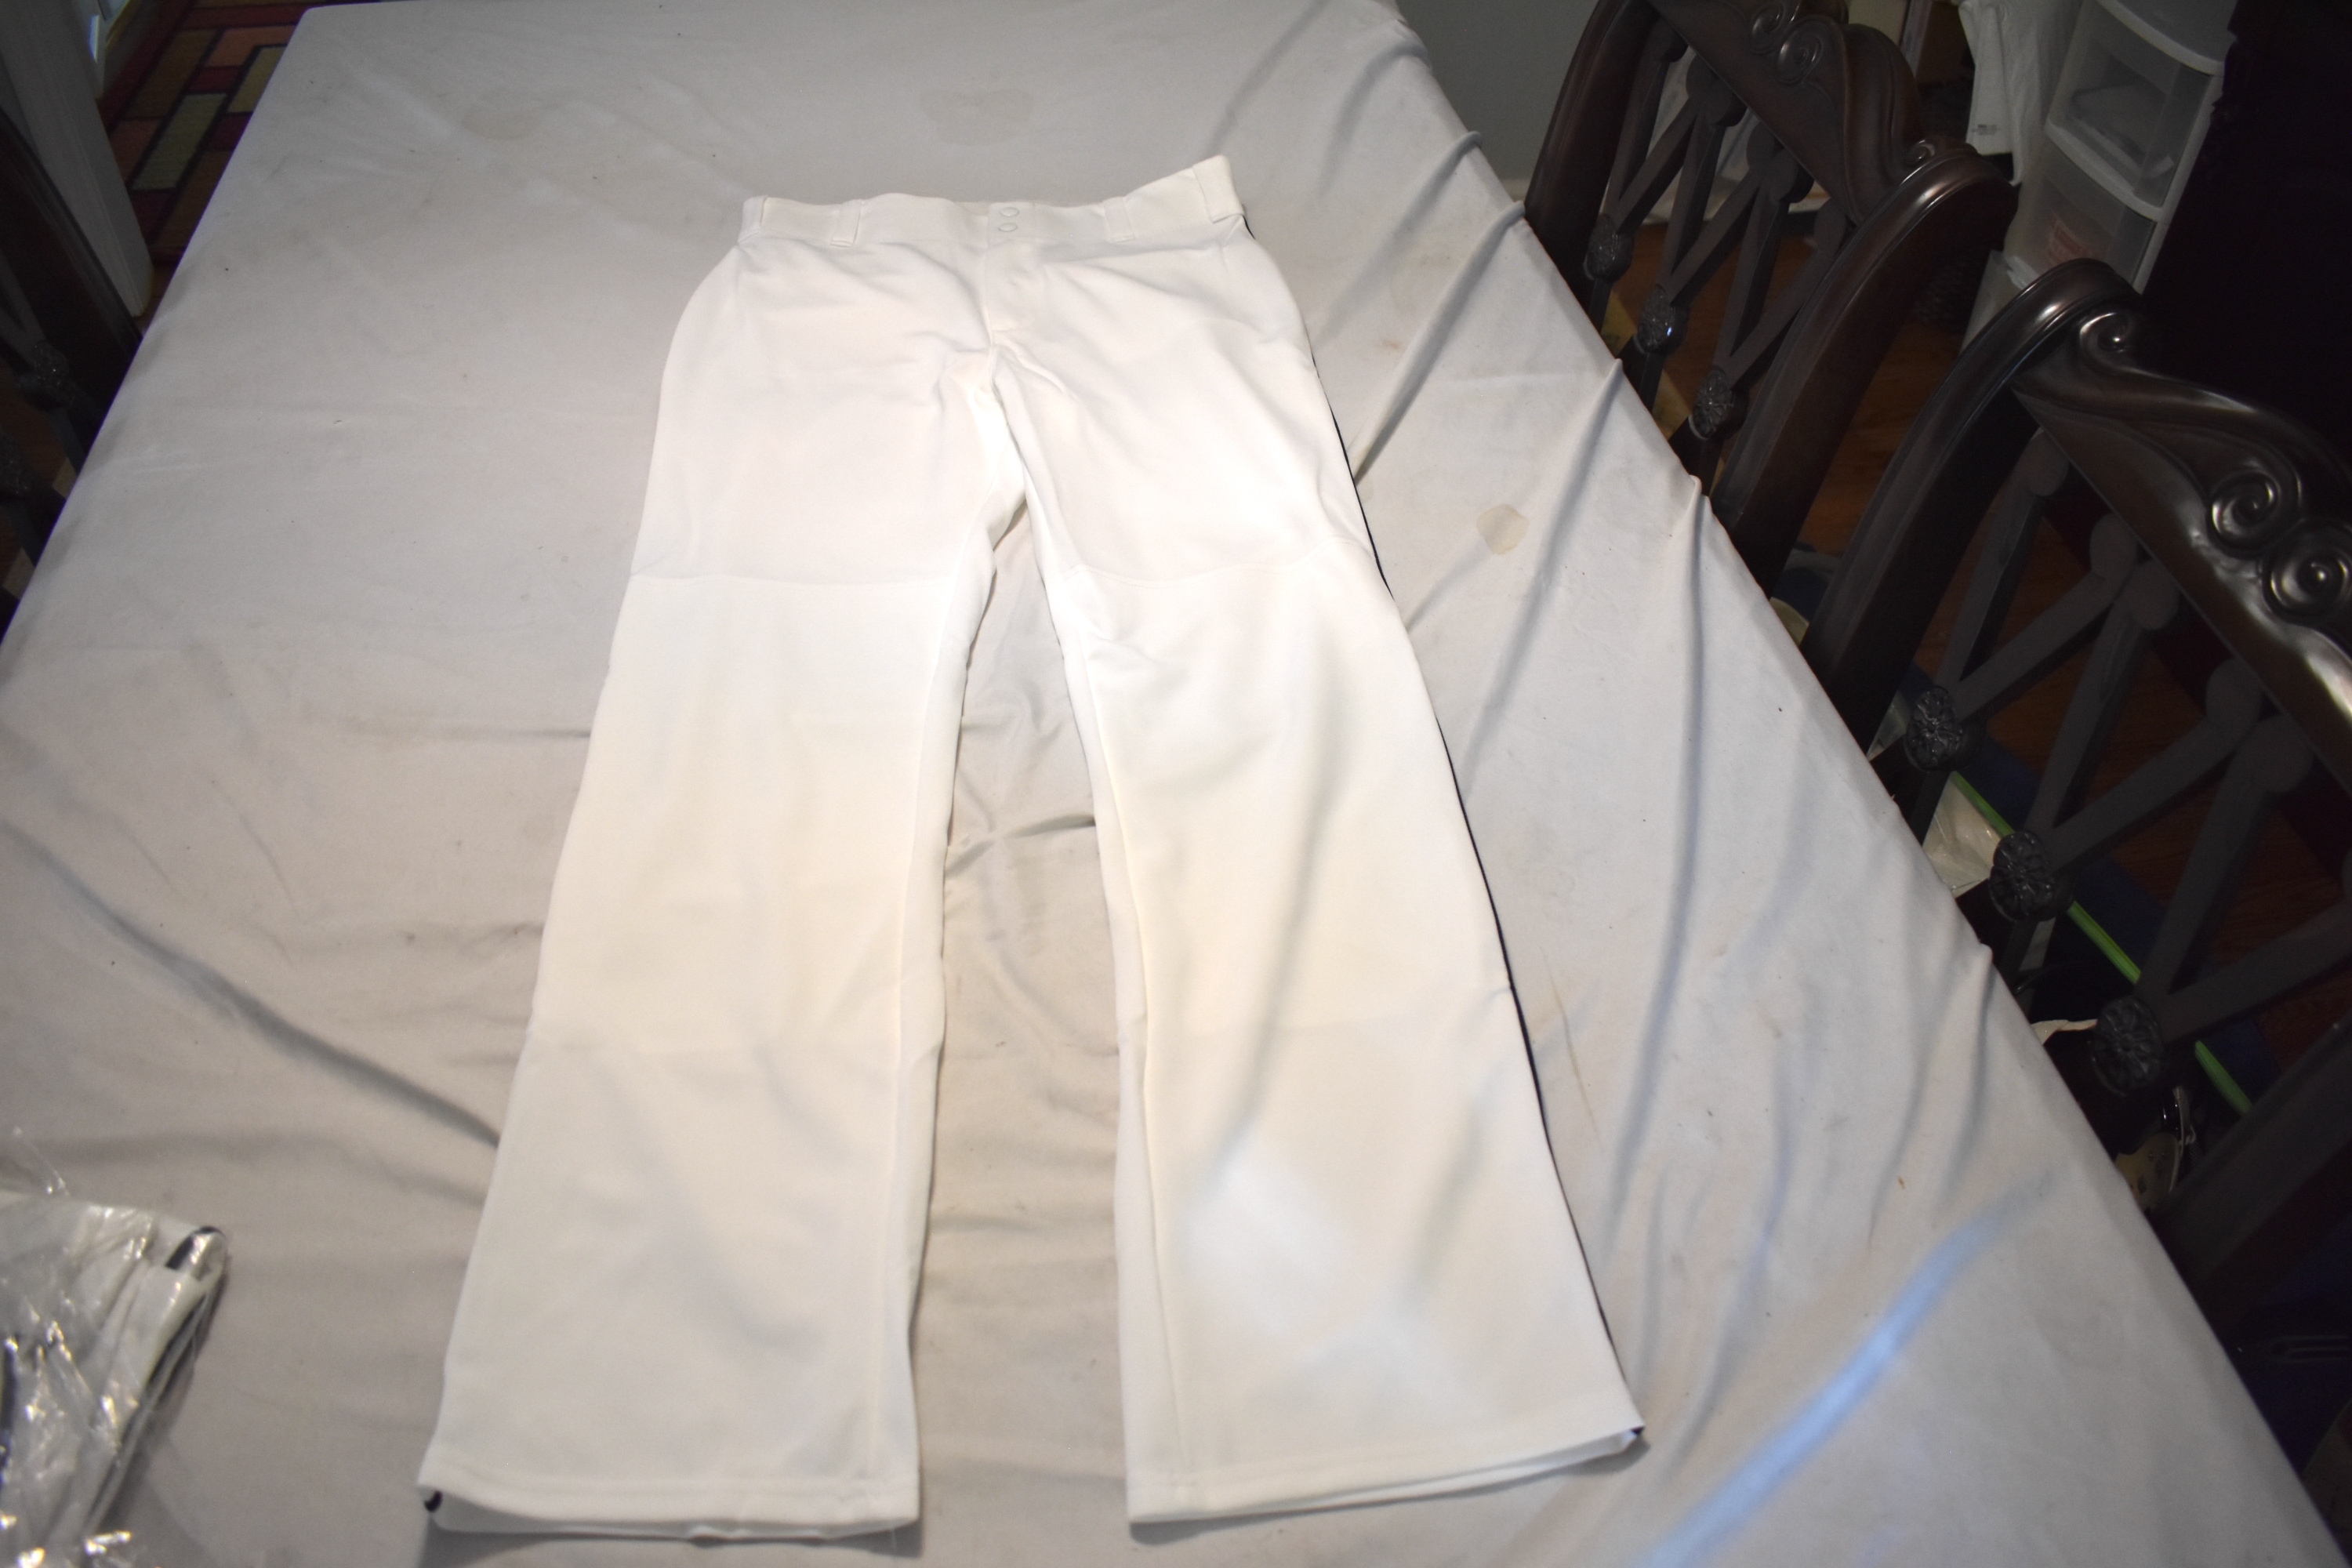 NEW - Alleson Athletics Piped Baseball Pants, White/Blue, Adult Large